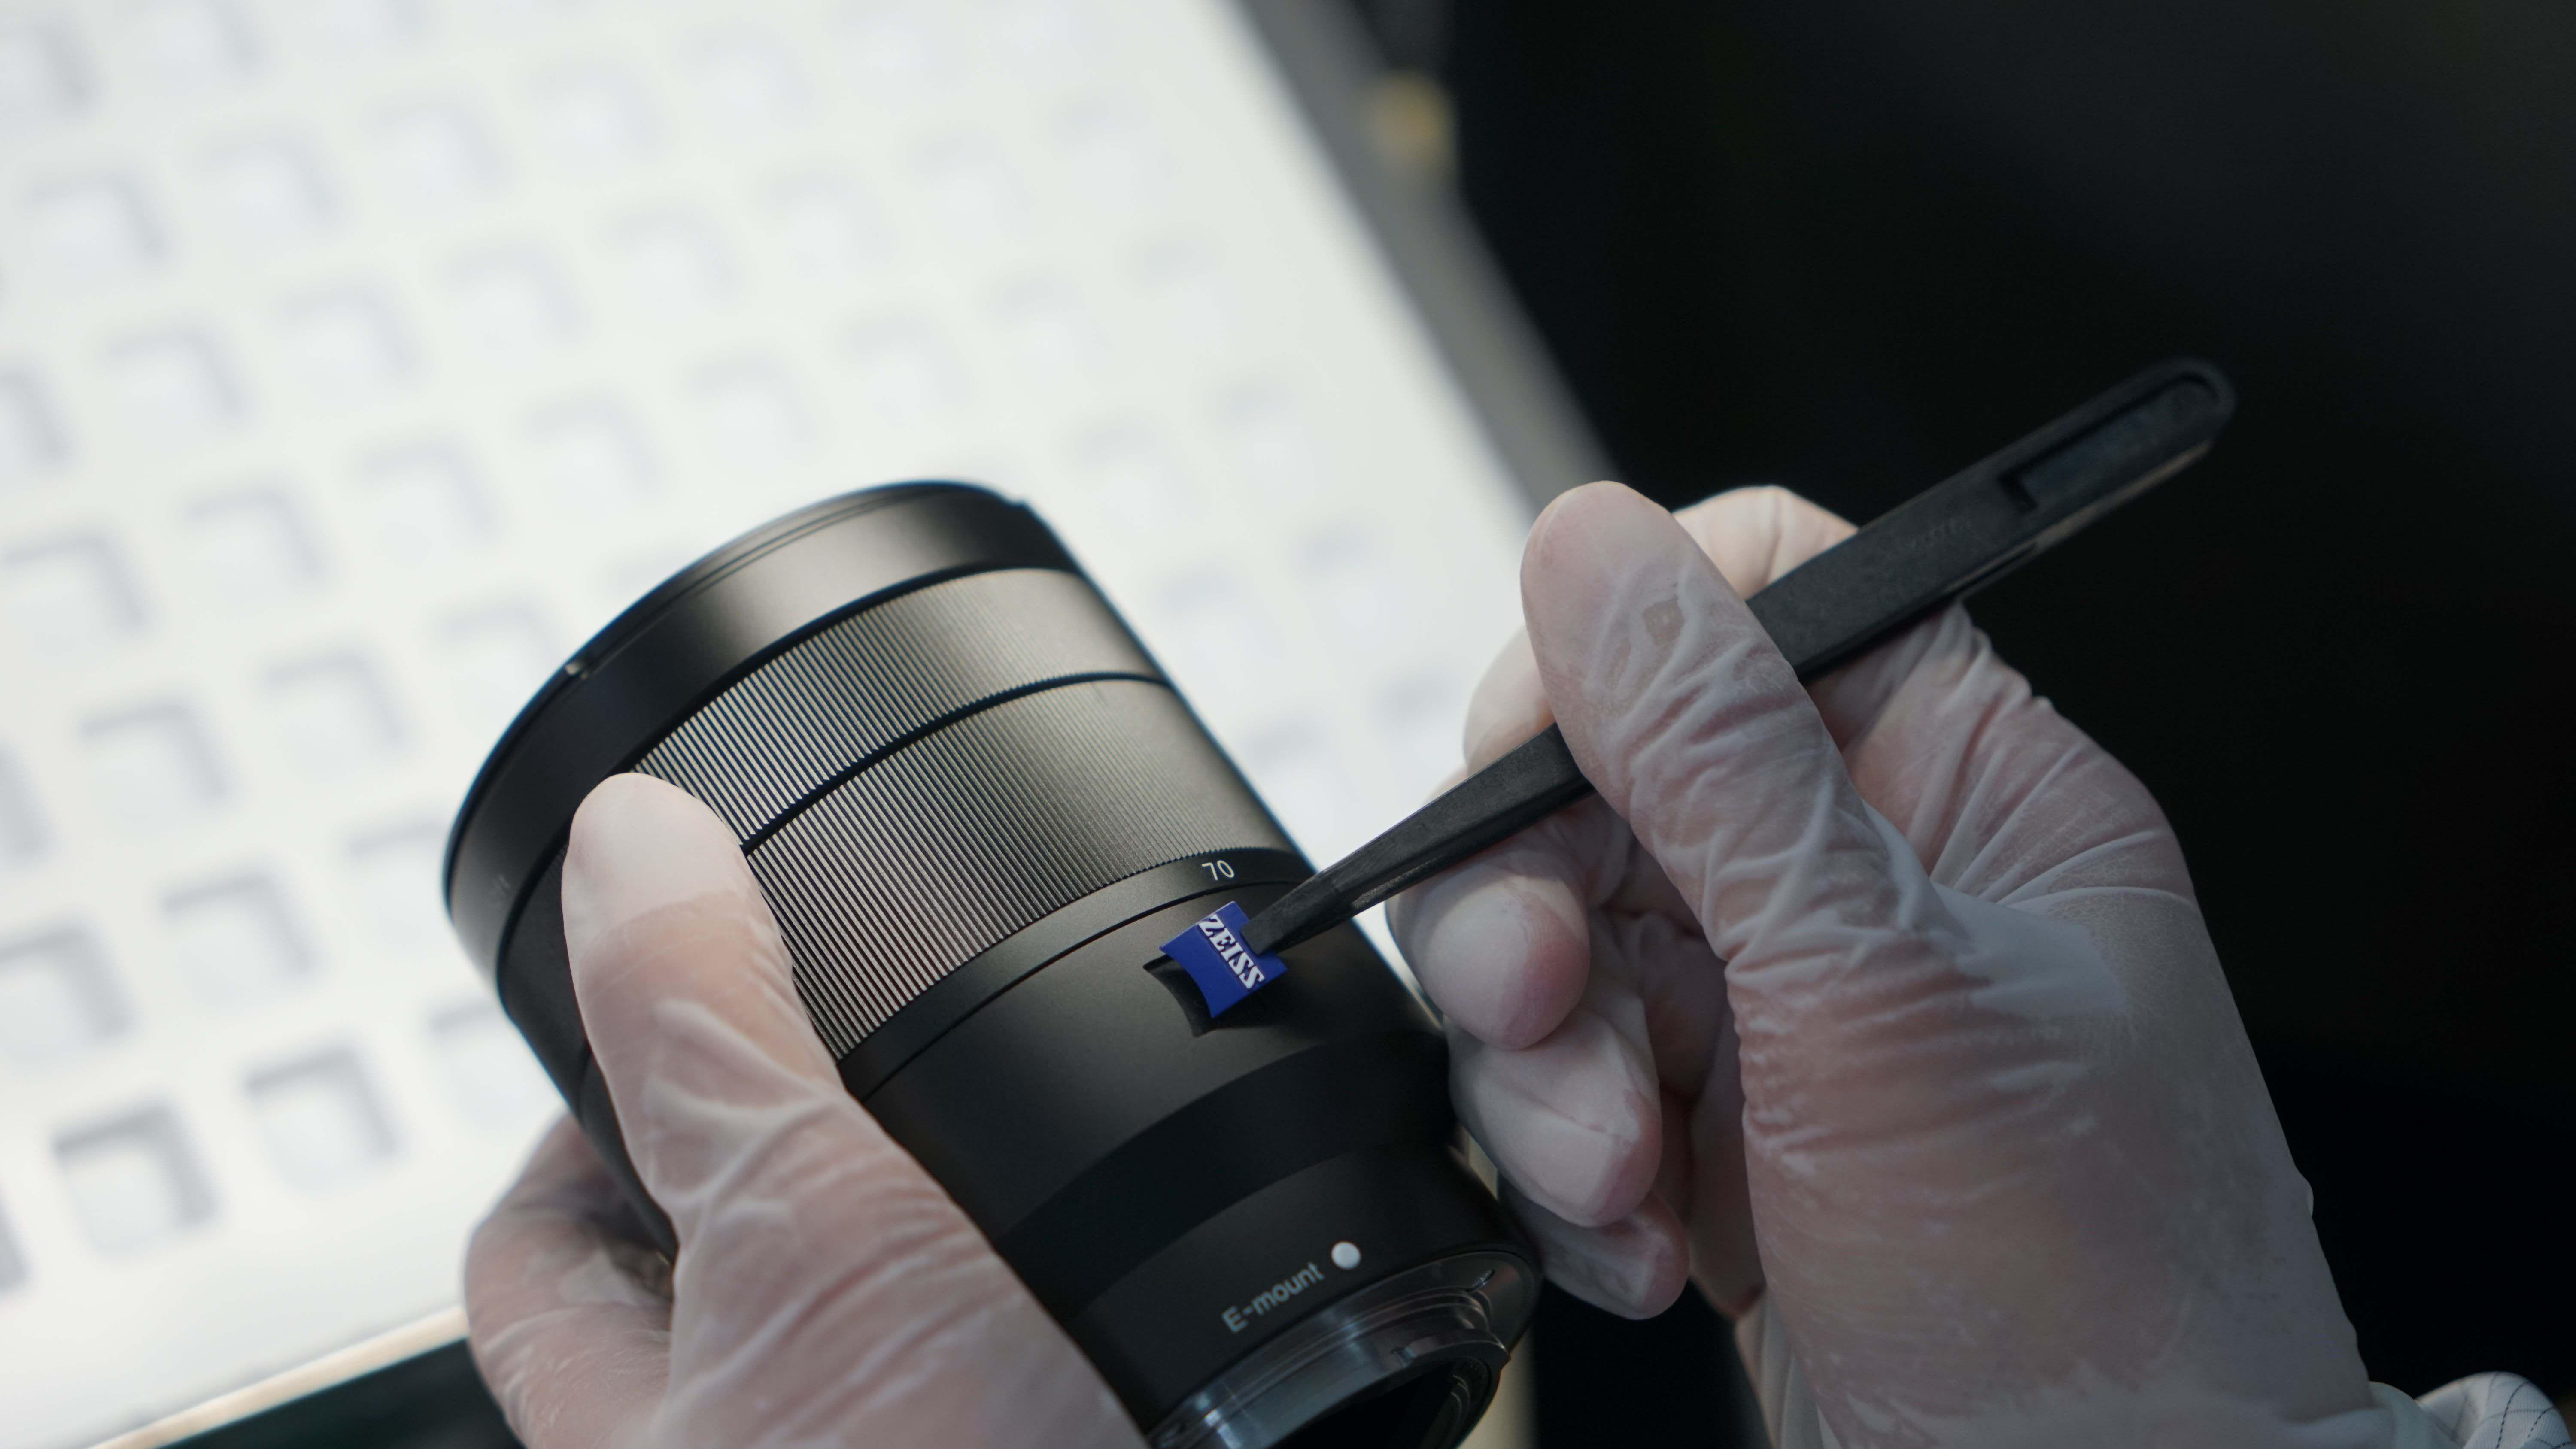 New Zeiss Logo - What's in a name? Zeiss provides details on lens partnerships and ...